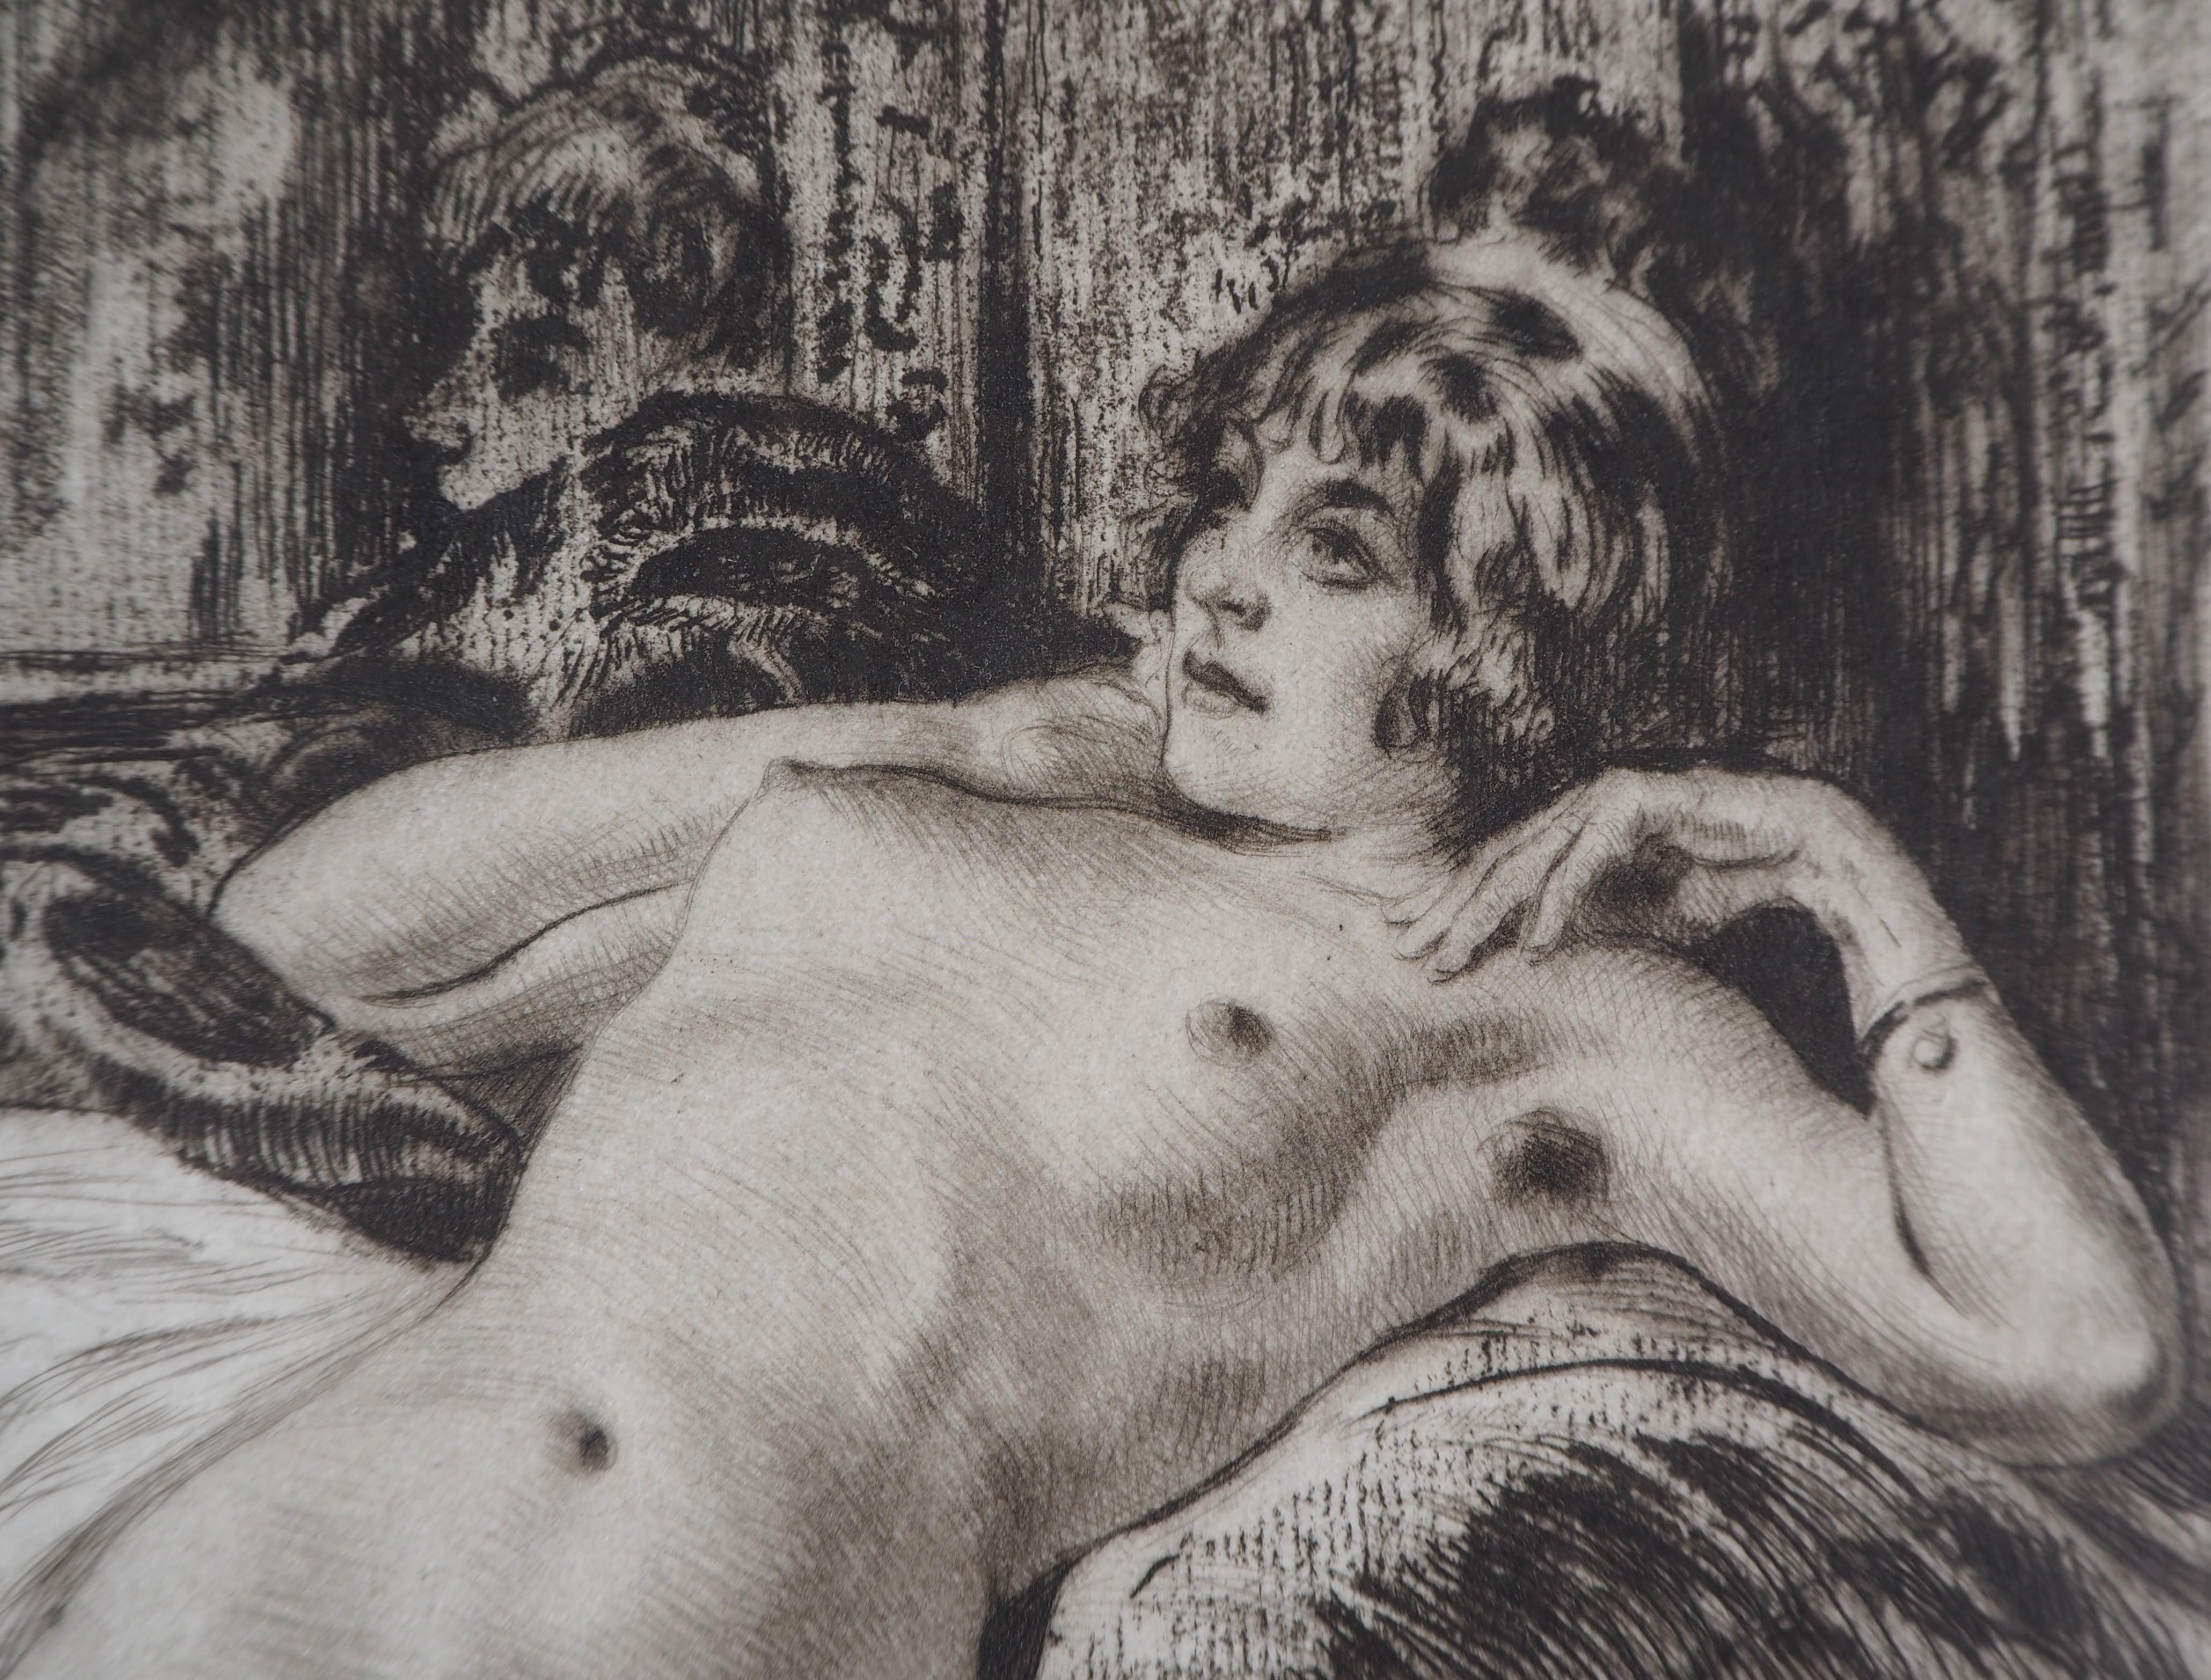 Alméry Lobel-Riche
Lying Nude on a bed

Original etching
Handsigned in pencil
Numbered /12
On parchment 31 x 22.5 cm (c. 12.2 x 8.9 inches)

Excellent condition